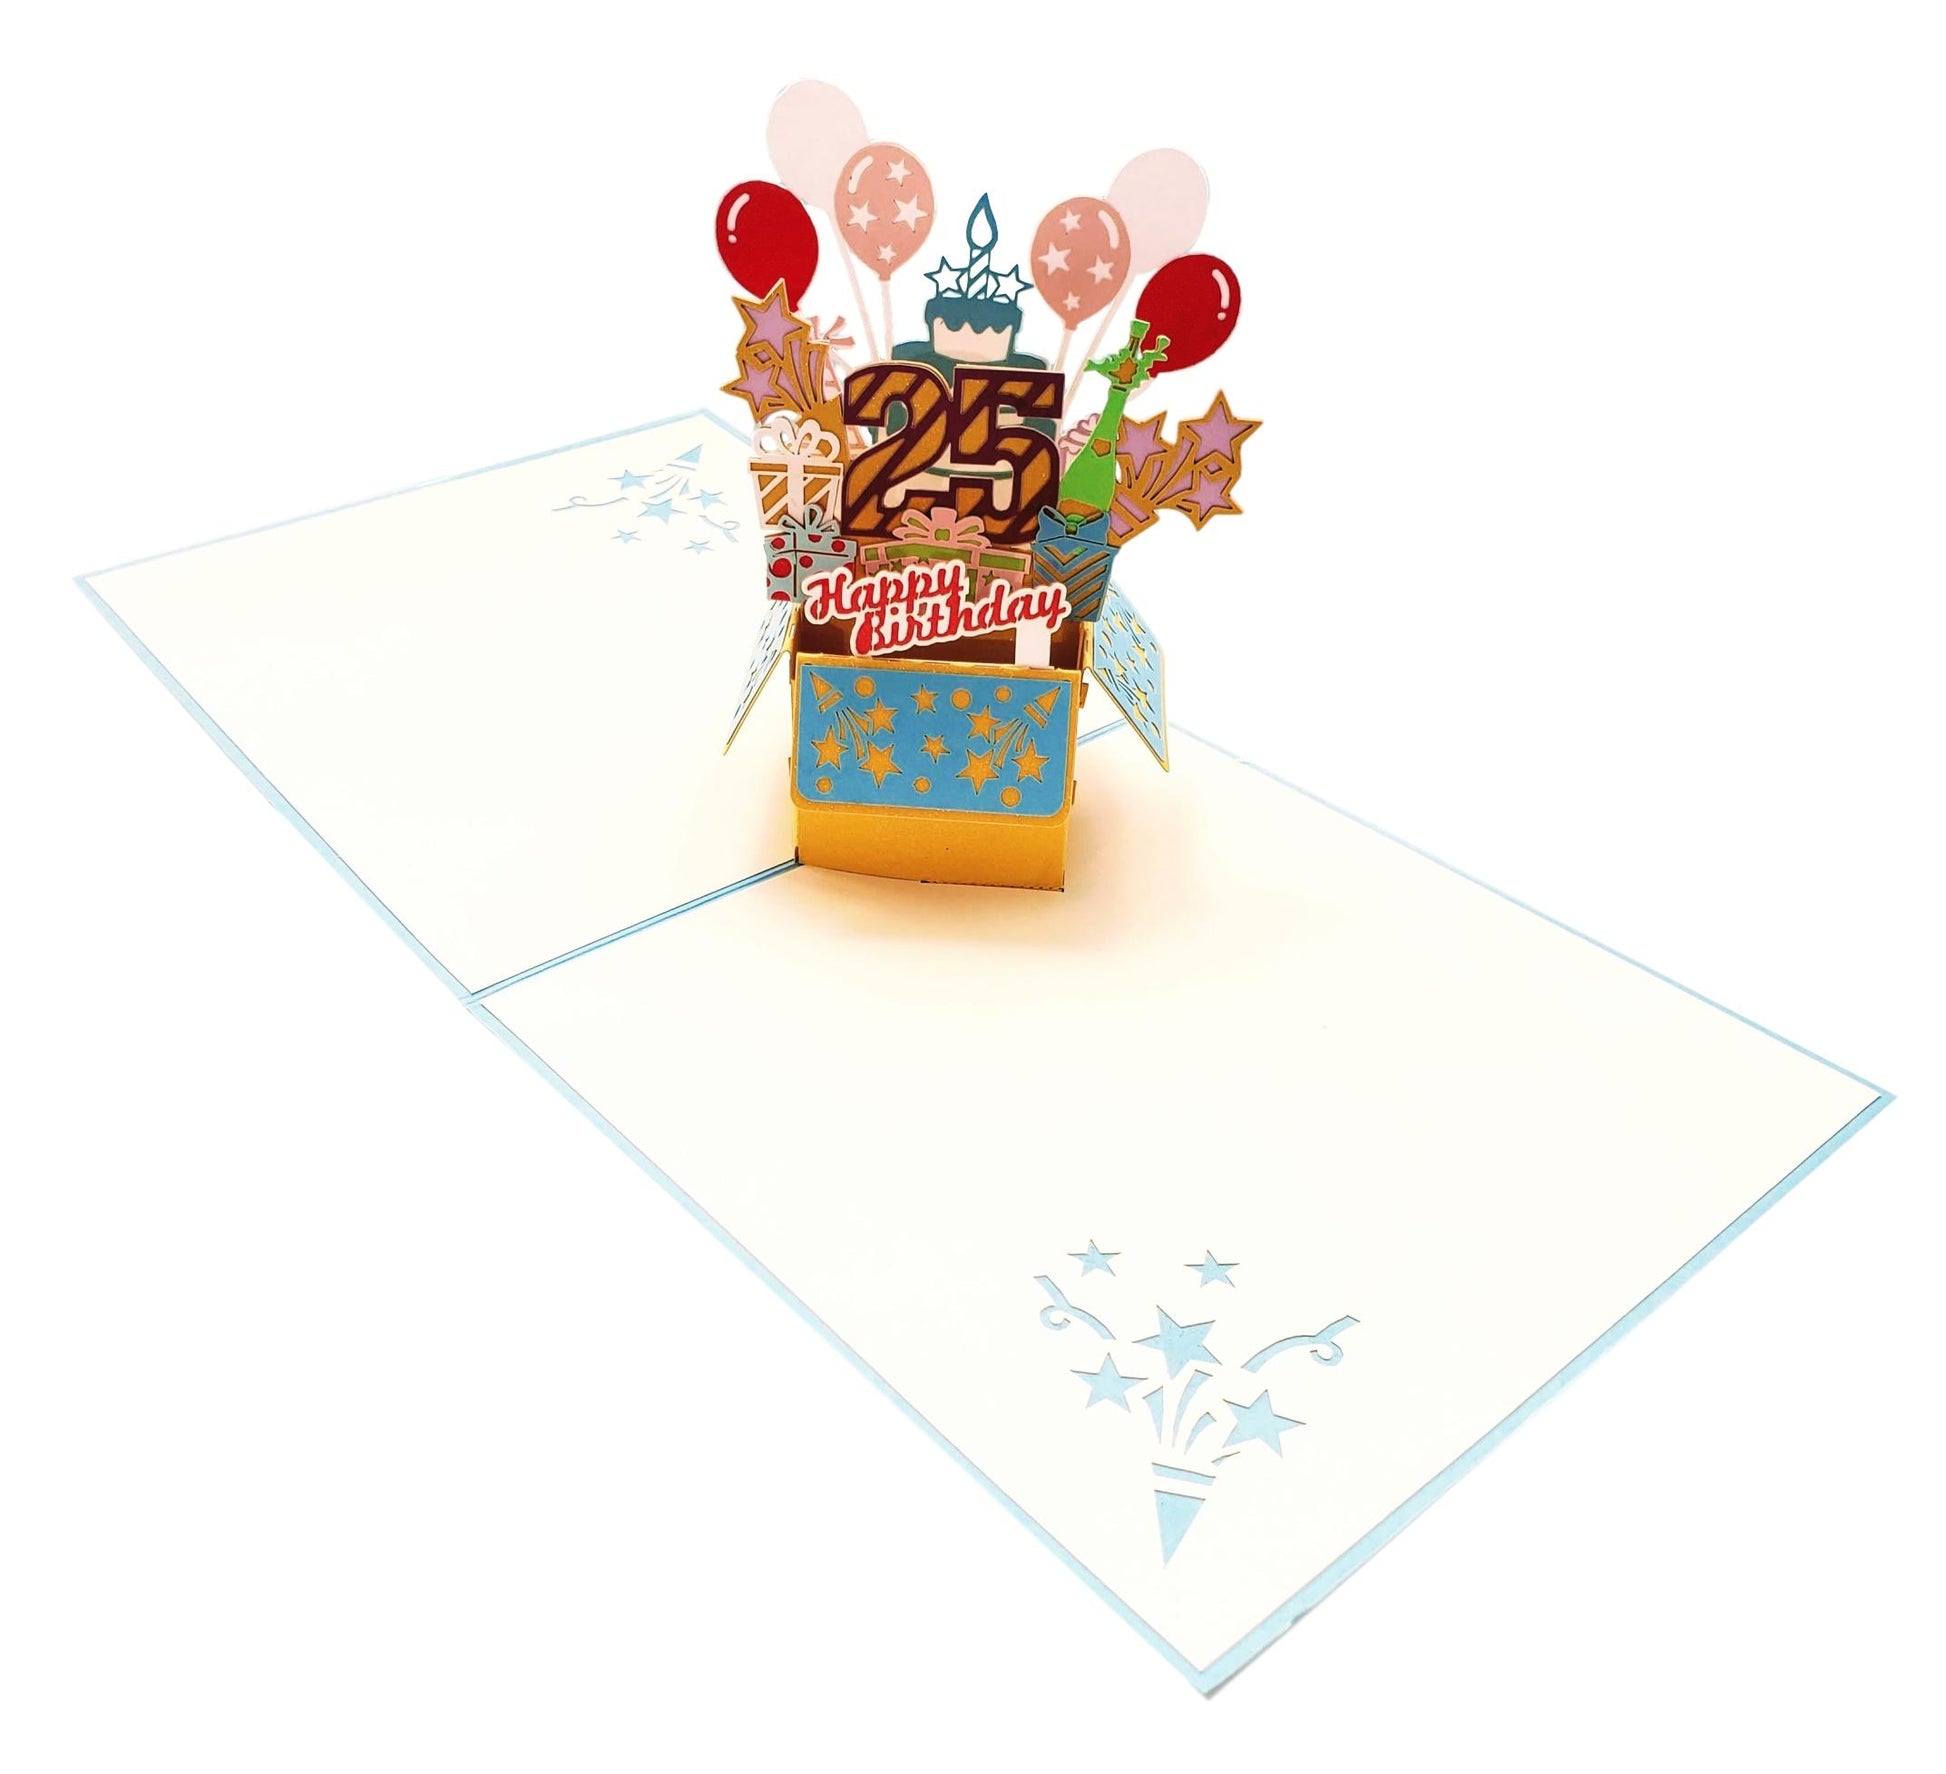 25th Blue Party Box 3D Pop Up Greeting Card - Balloons - best wishes - Birthday - Blue - Celebration - iGifts And Cards